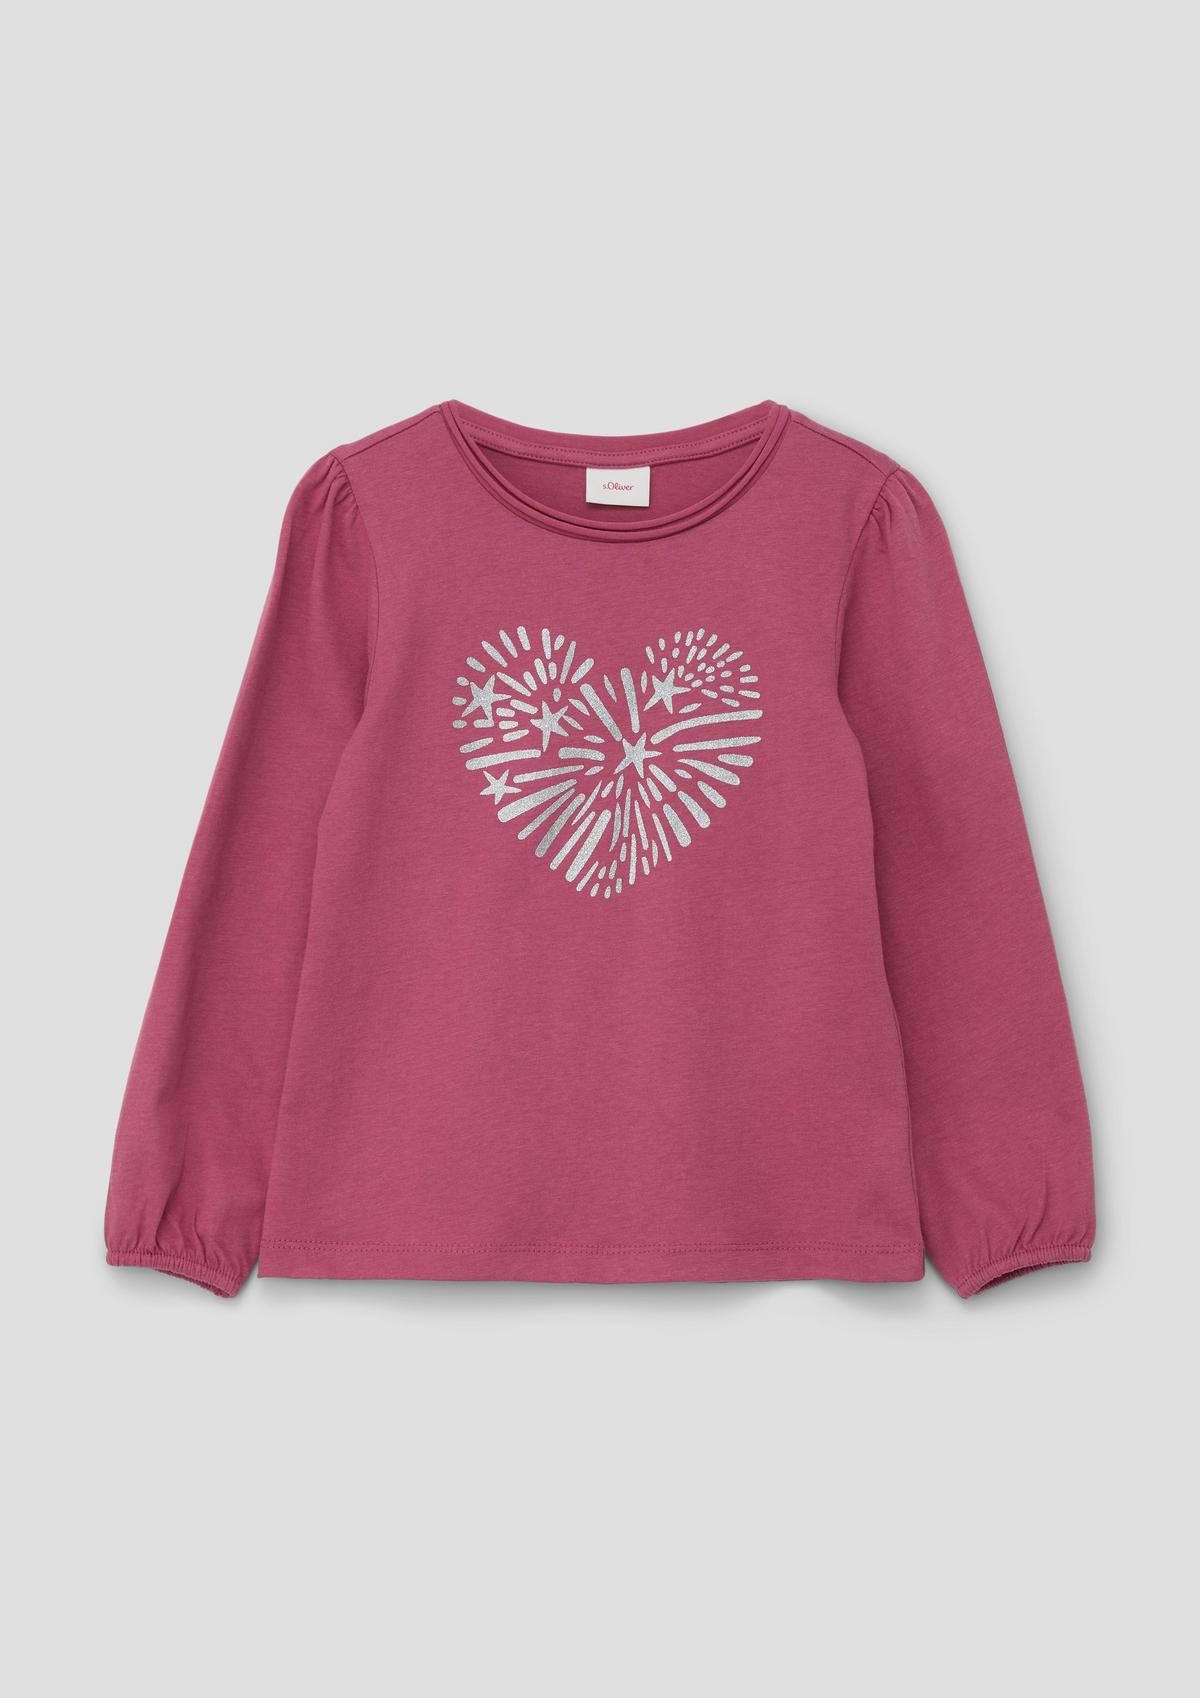 s.Oliver Long sleeve top with a glittering effect print